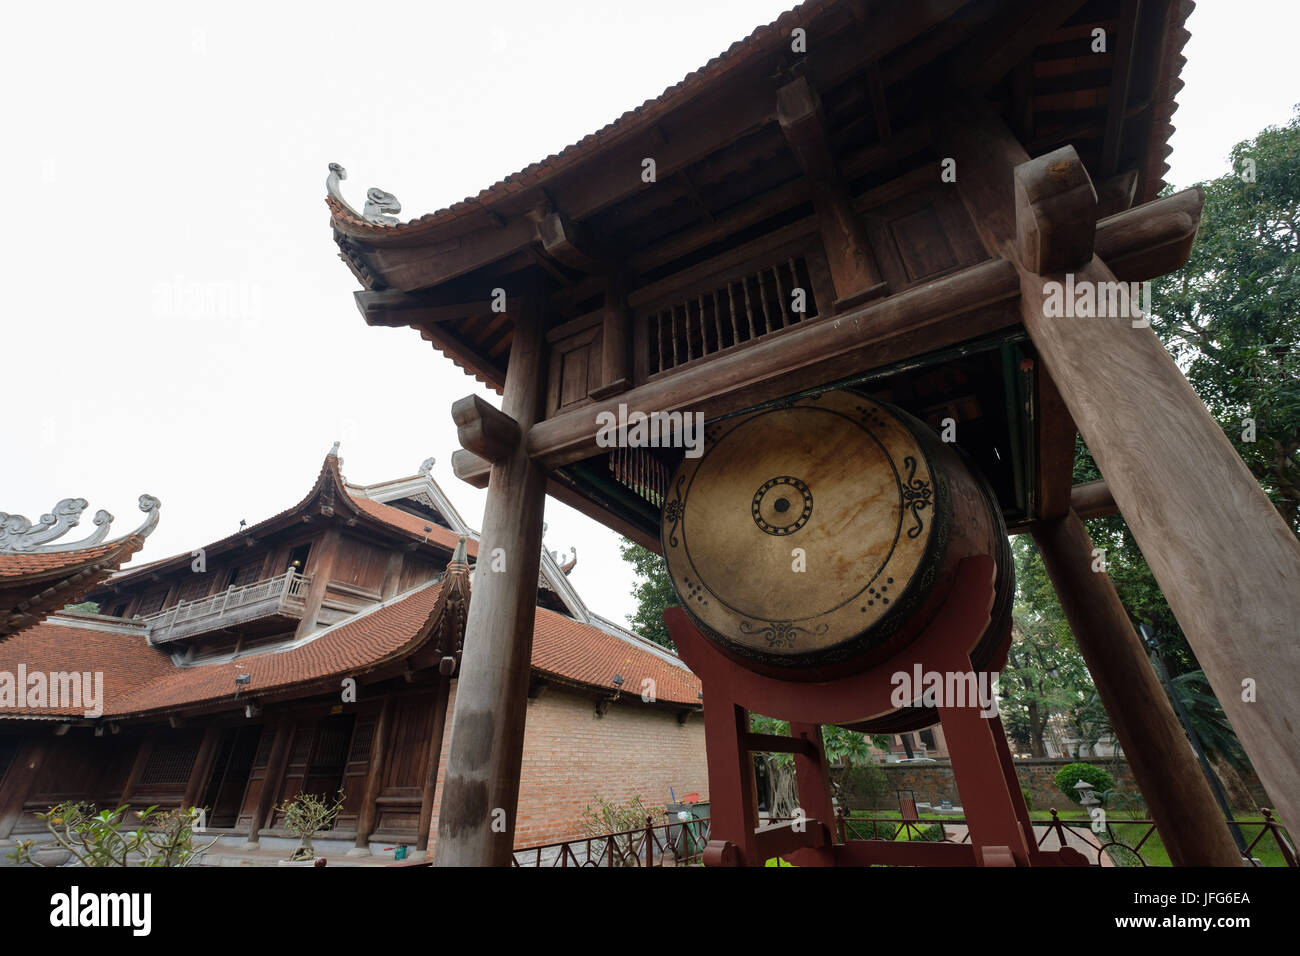 Giant gong at the Temple of Literature in Hanoi, Vietnam, Asia Stock Photo